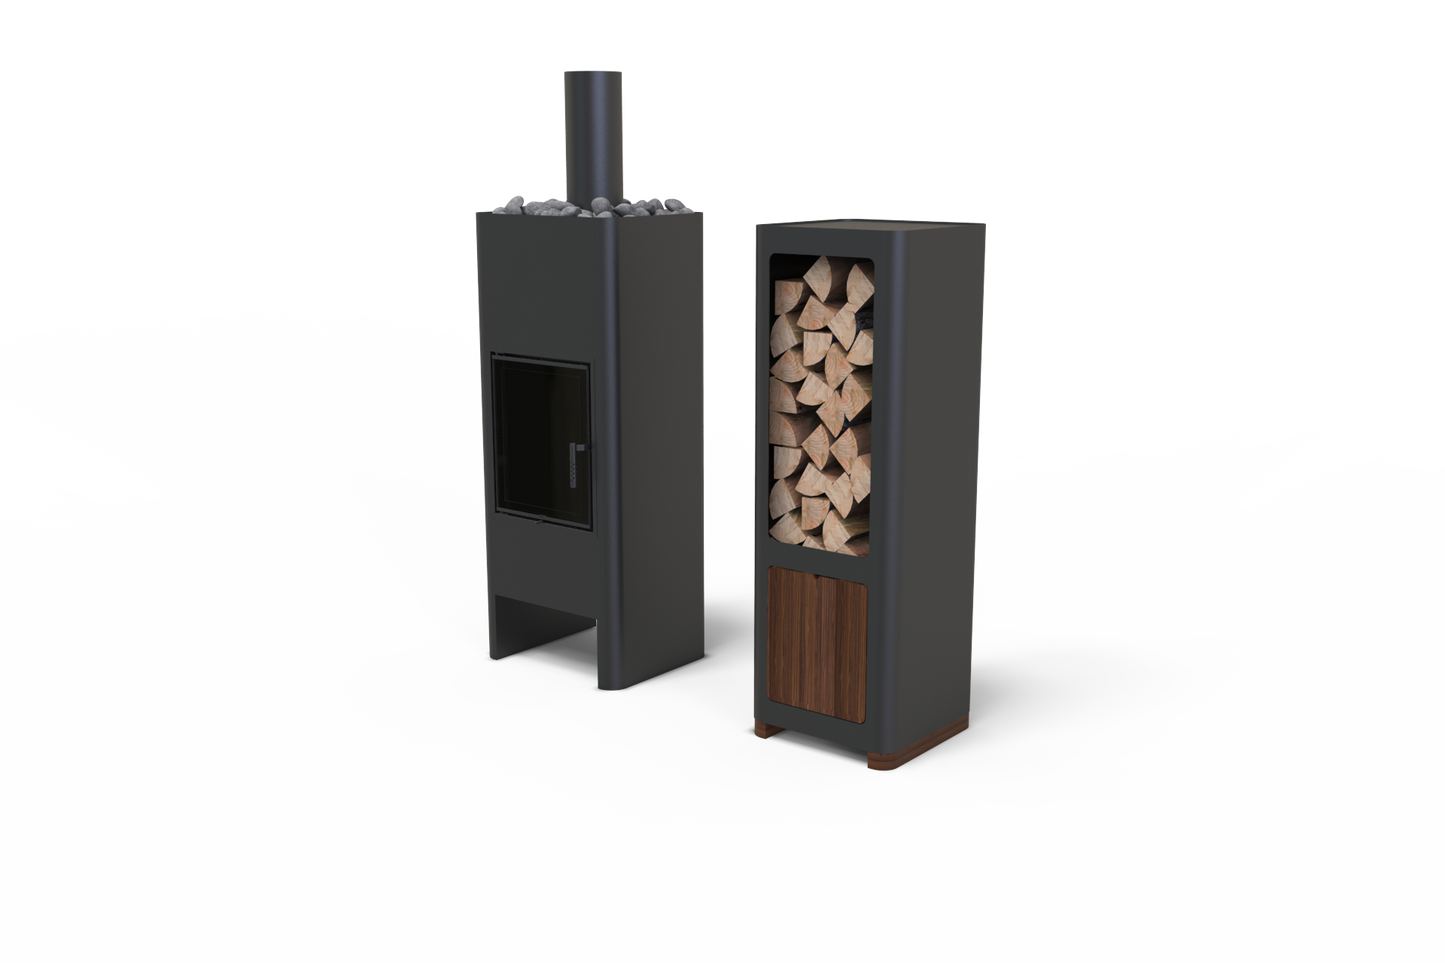 TIMO + BOX Freestanding Fireplace - Minimalist Form and High Efficiency, 2 Colours